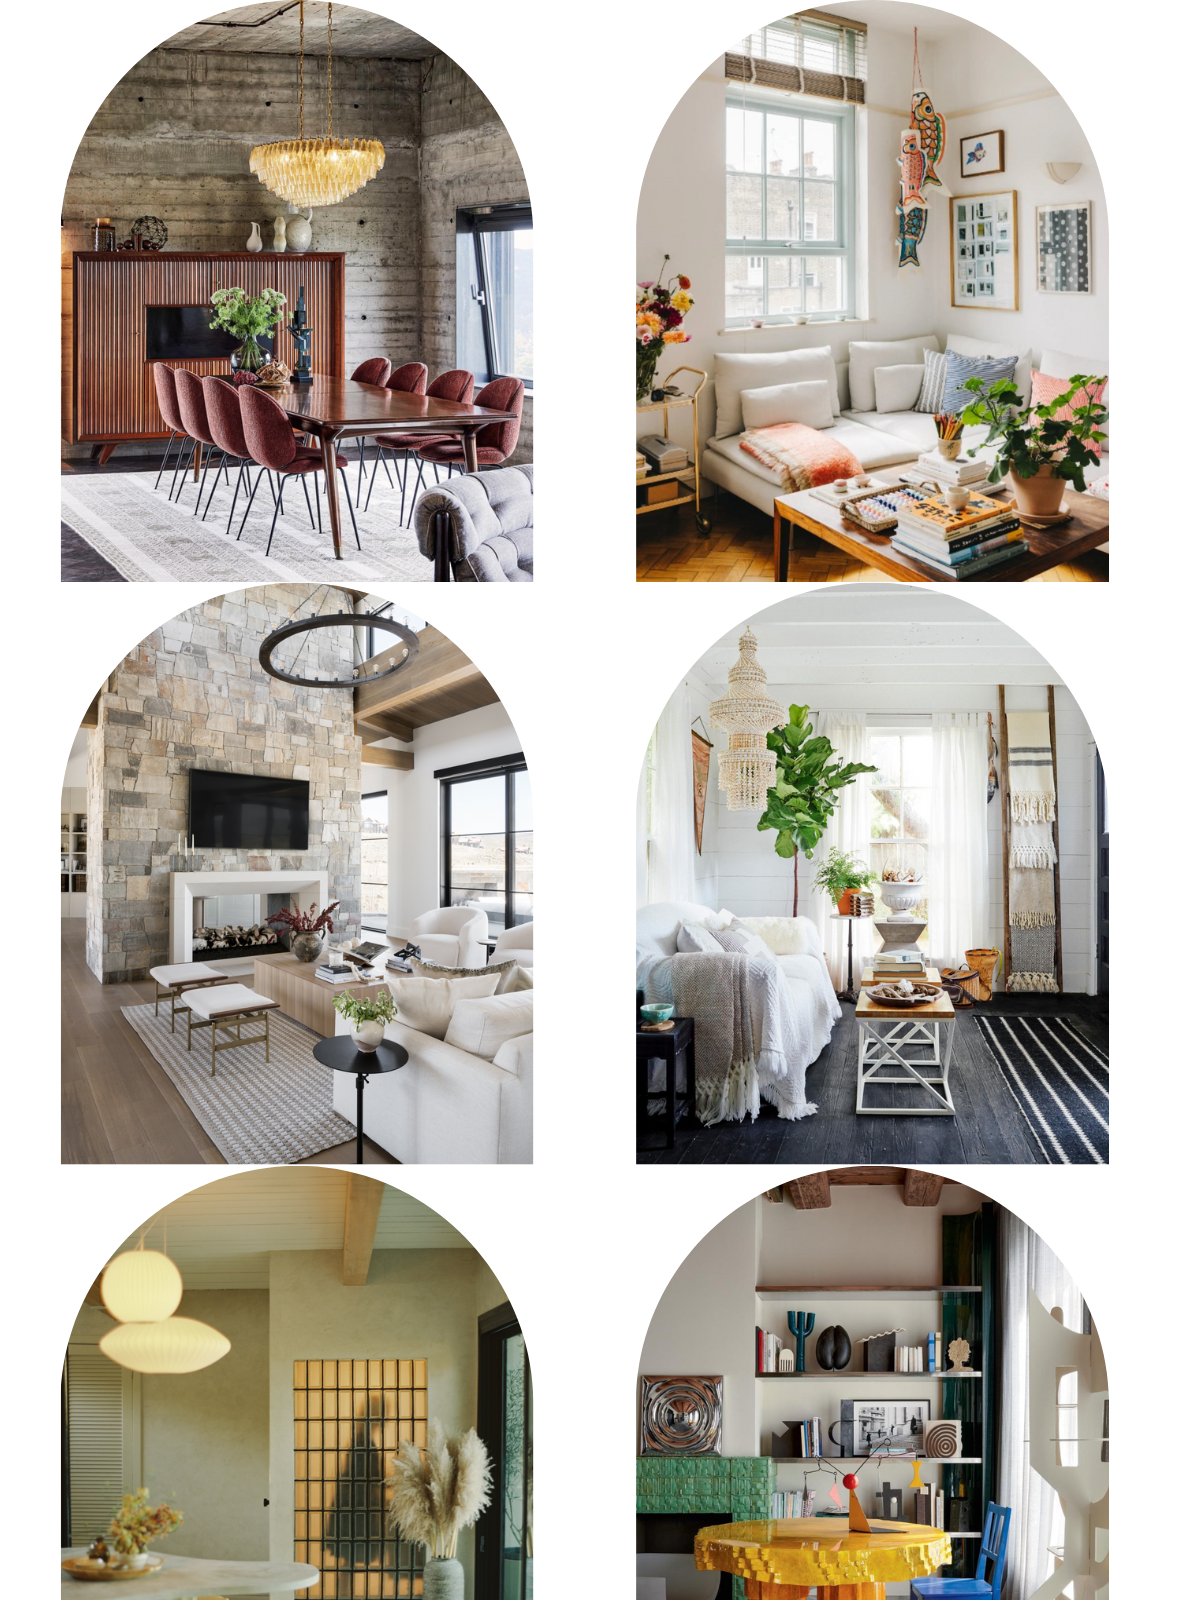 photo collage of different interior design styles